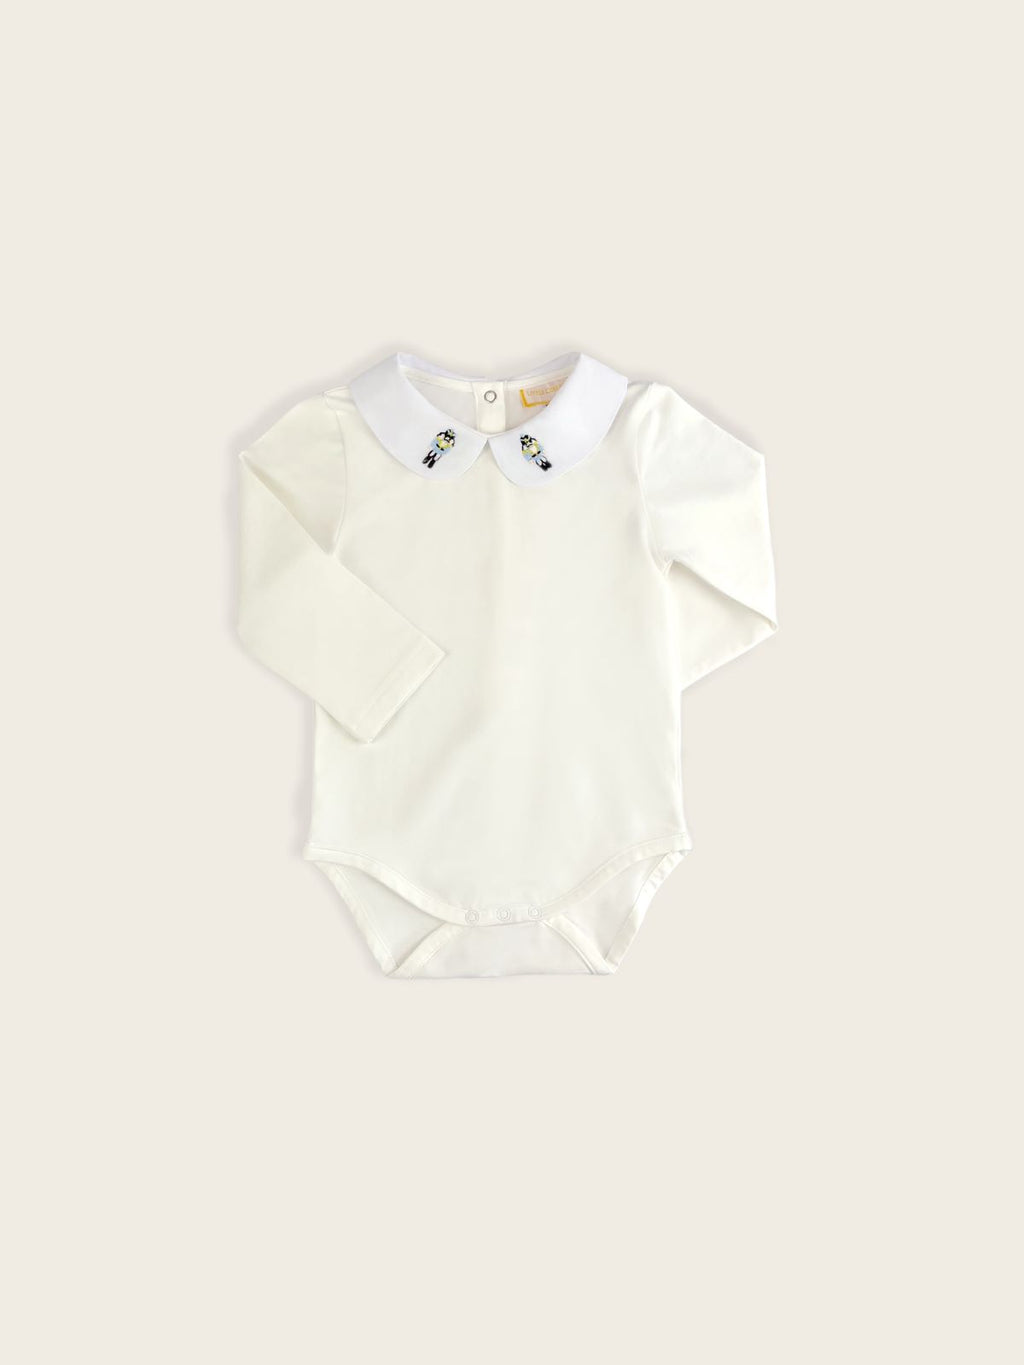 A classic pique bodysuit in white with a Danish soldiers embroidered onto the collar.